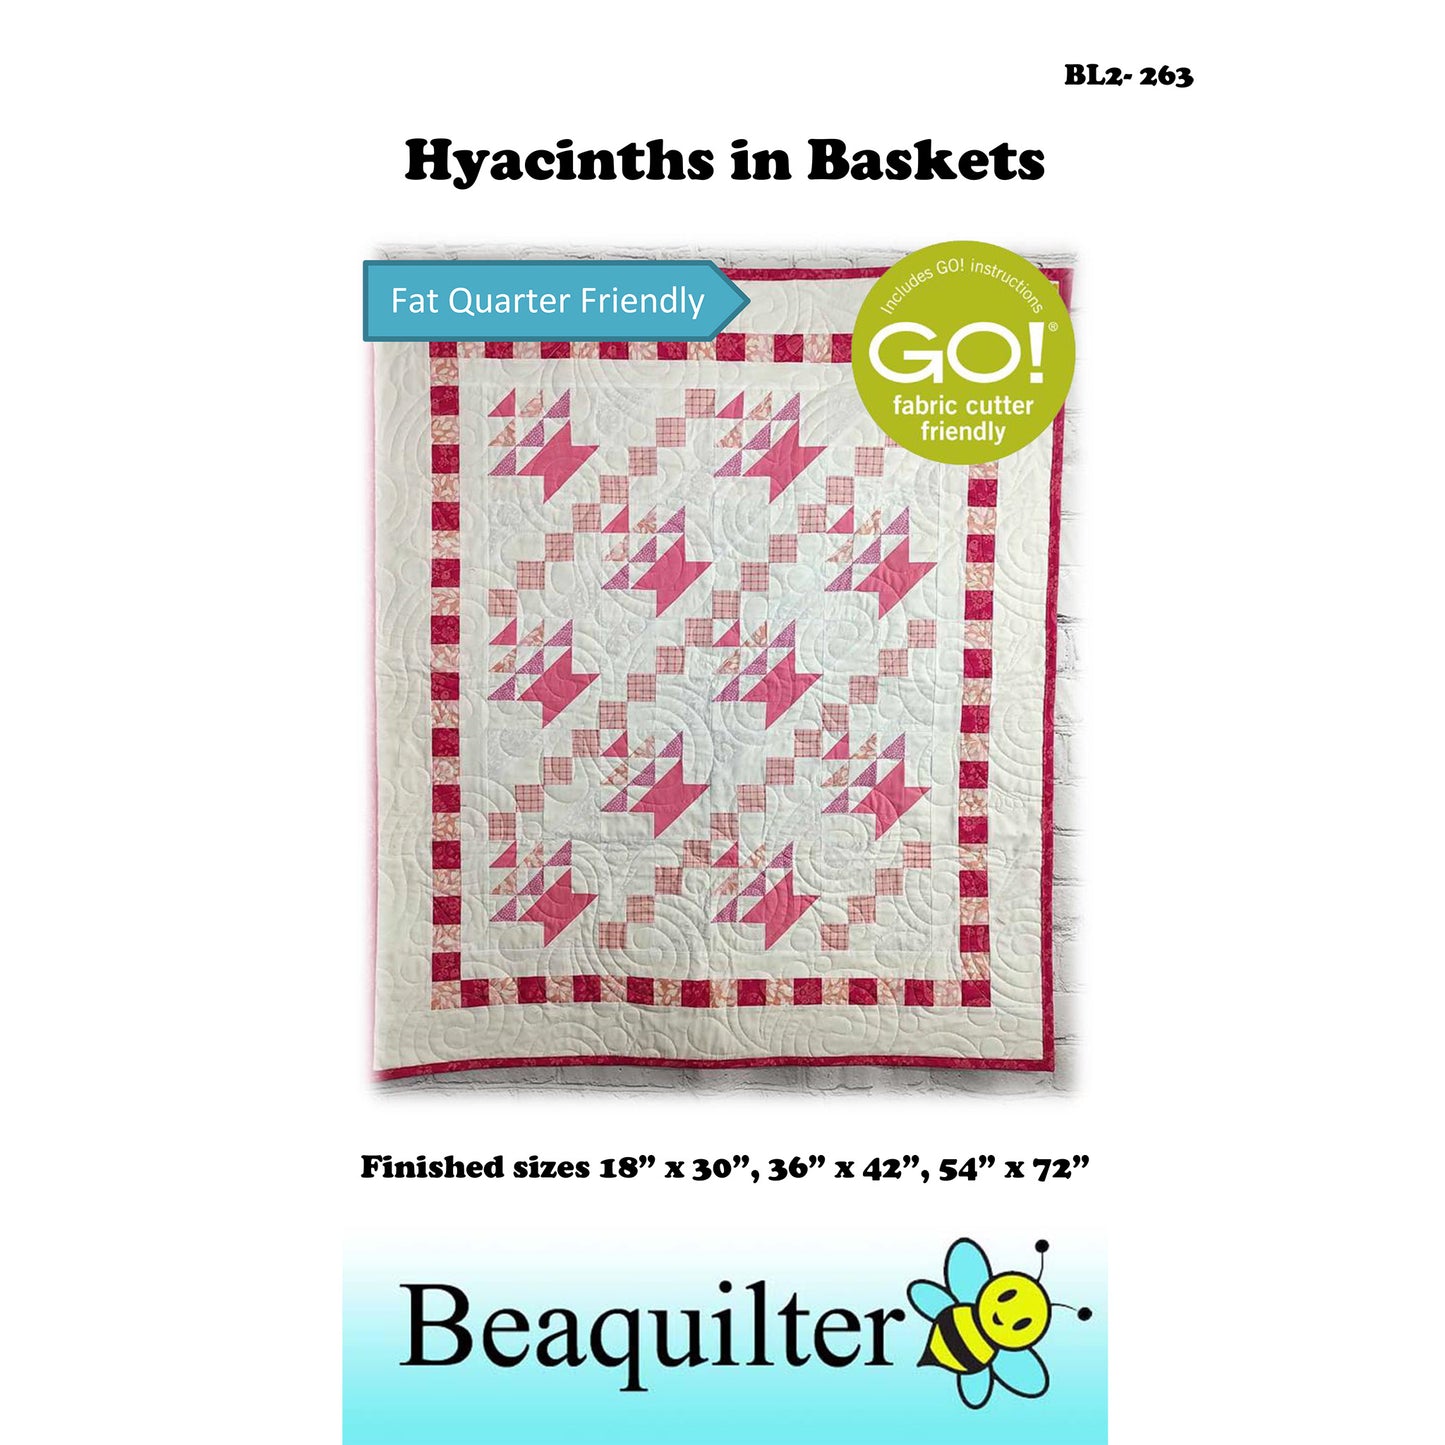 Pink and White quilt with baskets in  diagonal rows with upside down triangles inside to make them look like flowers and a border of small squares.